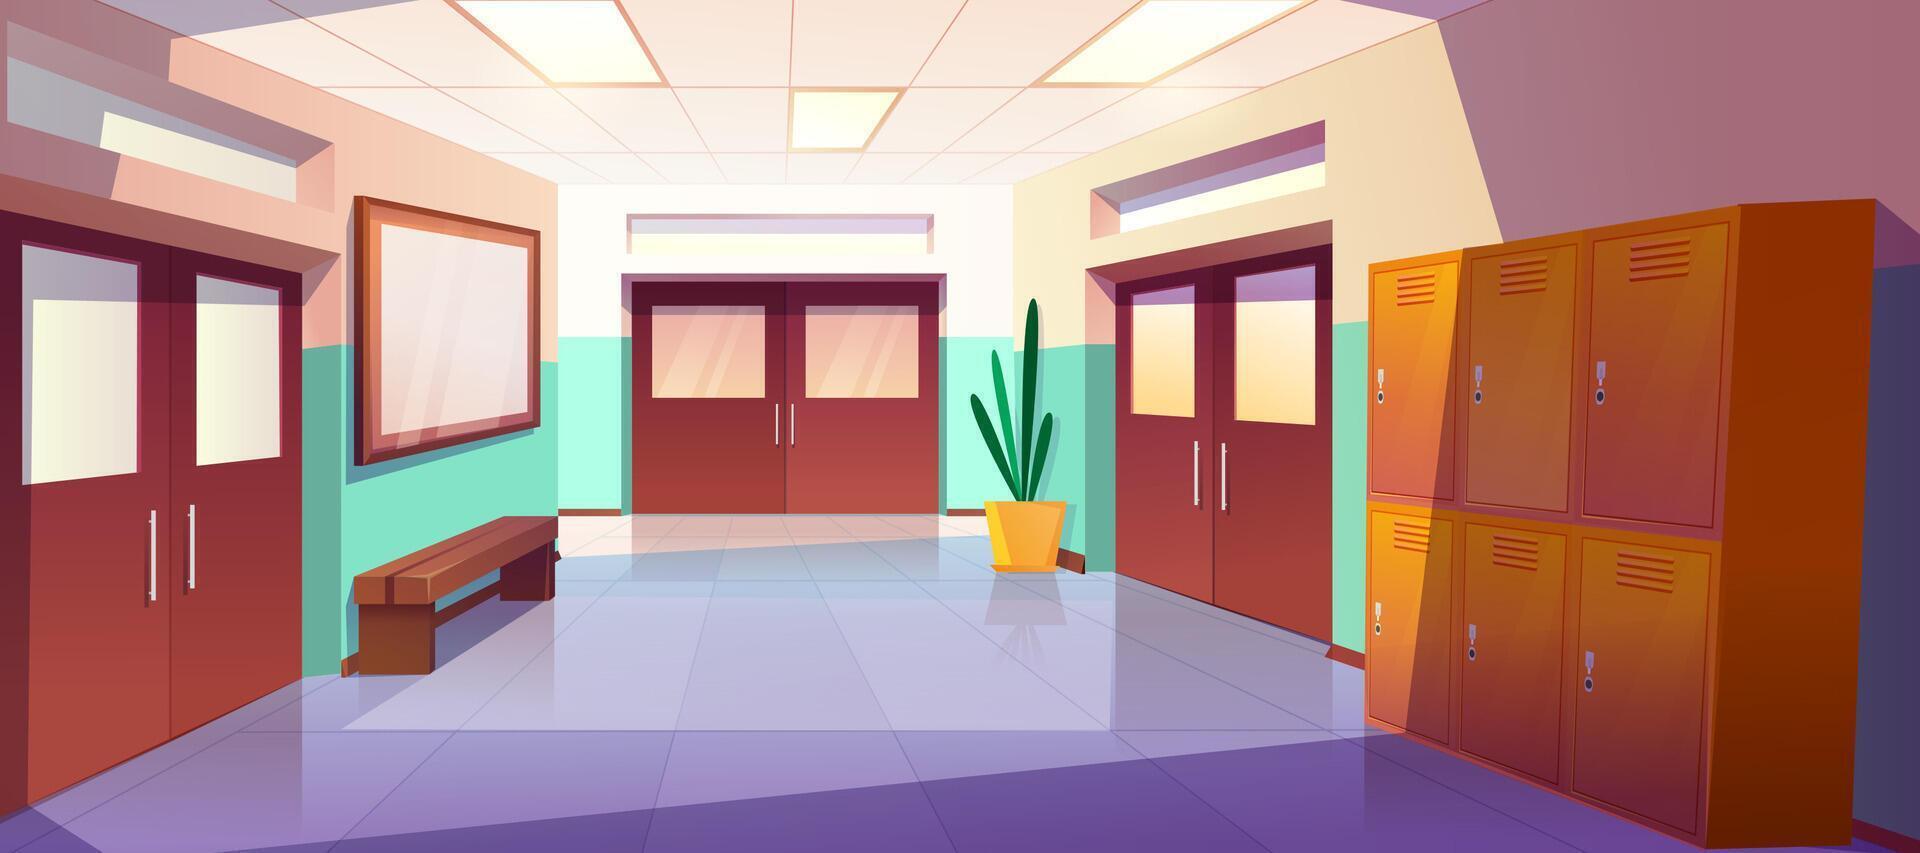 cartoon school hallway interior with metal lockers, ceiling lights, bench and bulletin board on wall. Empty university or college corridor with closed classroom doors and plant on floor. vector